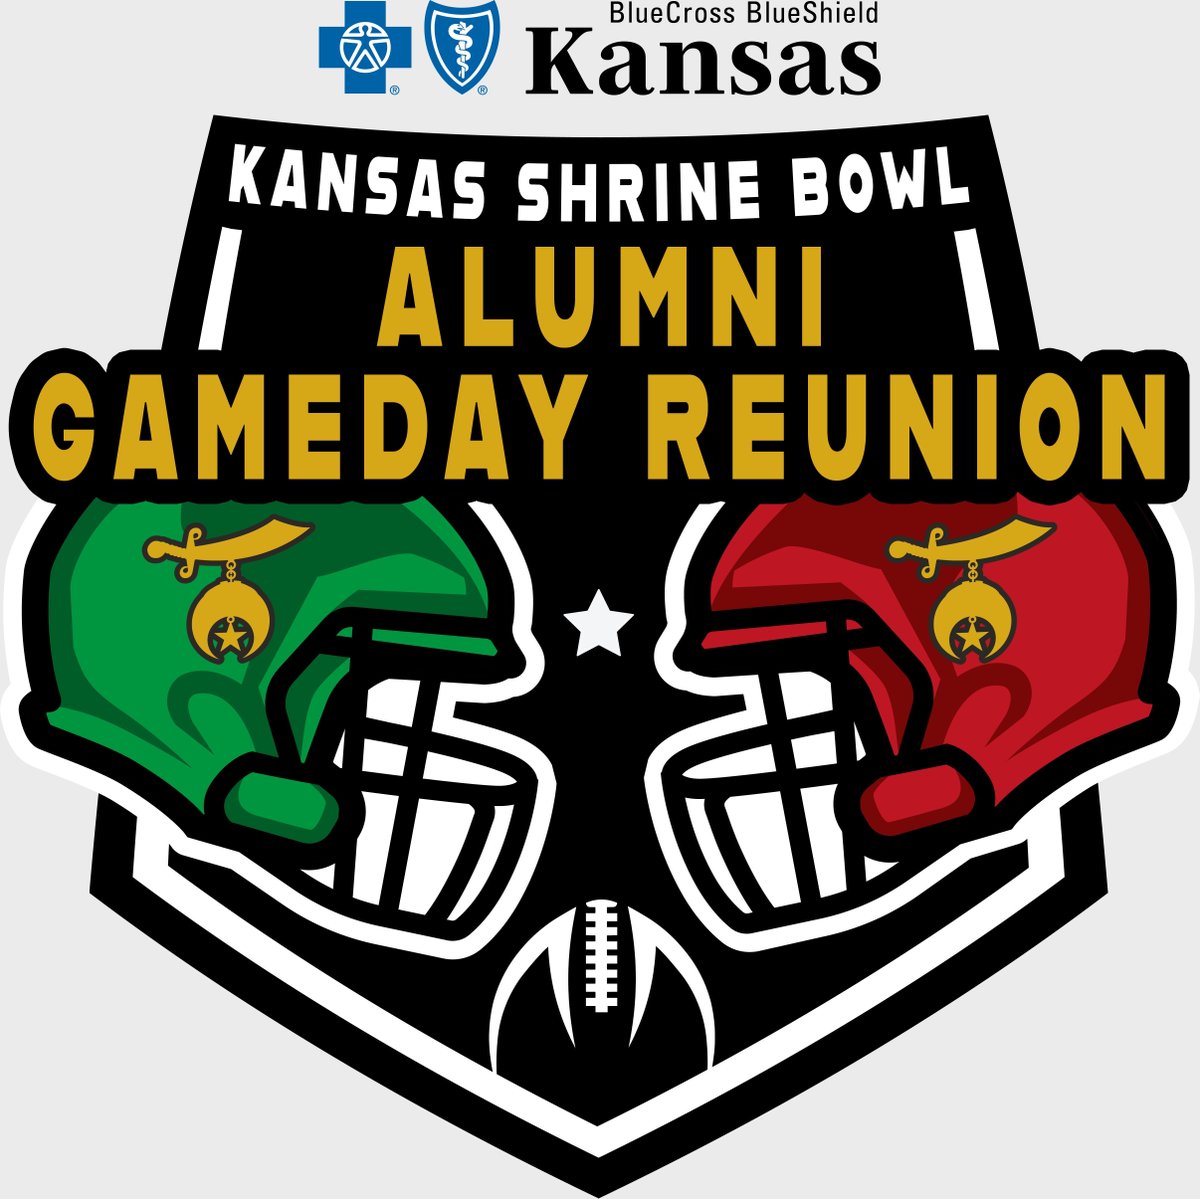 Calling all Kansas Shrine Bowl Alumni! Mark your calendars for the 2nd Annual Alumni Gameday Reunion presented by Blue Cross and Blue Shield of Kansas! Dynamic Discs in Emporia will be hosting the event prior to the game on June 29th from 1-4pm. buff.ly/3we9uRa